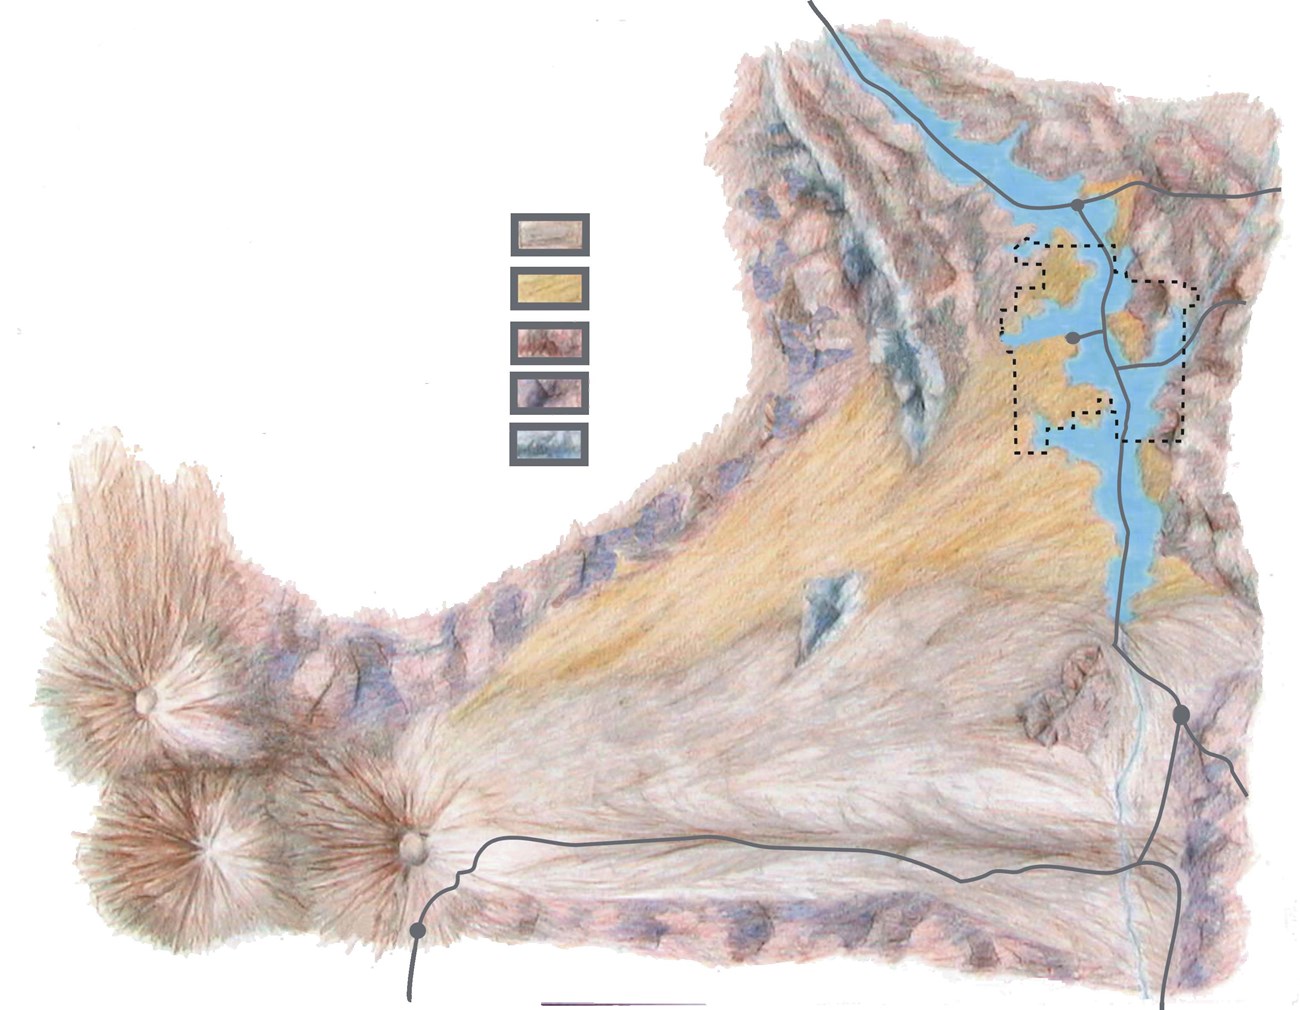 A colored pencil sketch illustrating an aerial view of the Guffey volcanic complex. The sketch shows this with respect to the lake and extent of the monument.